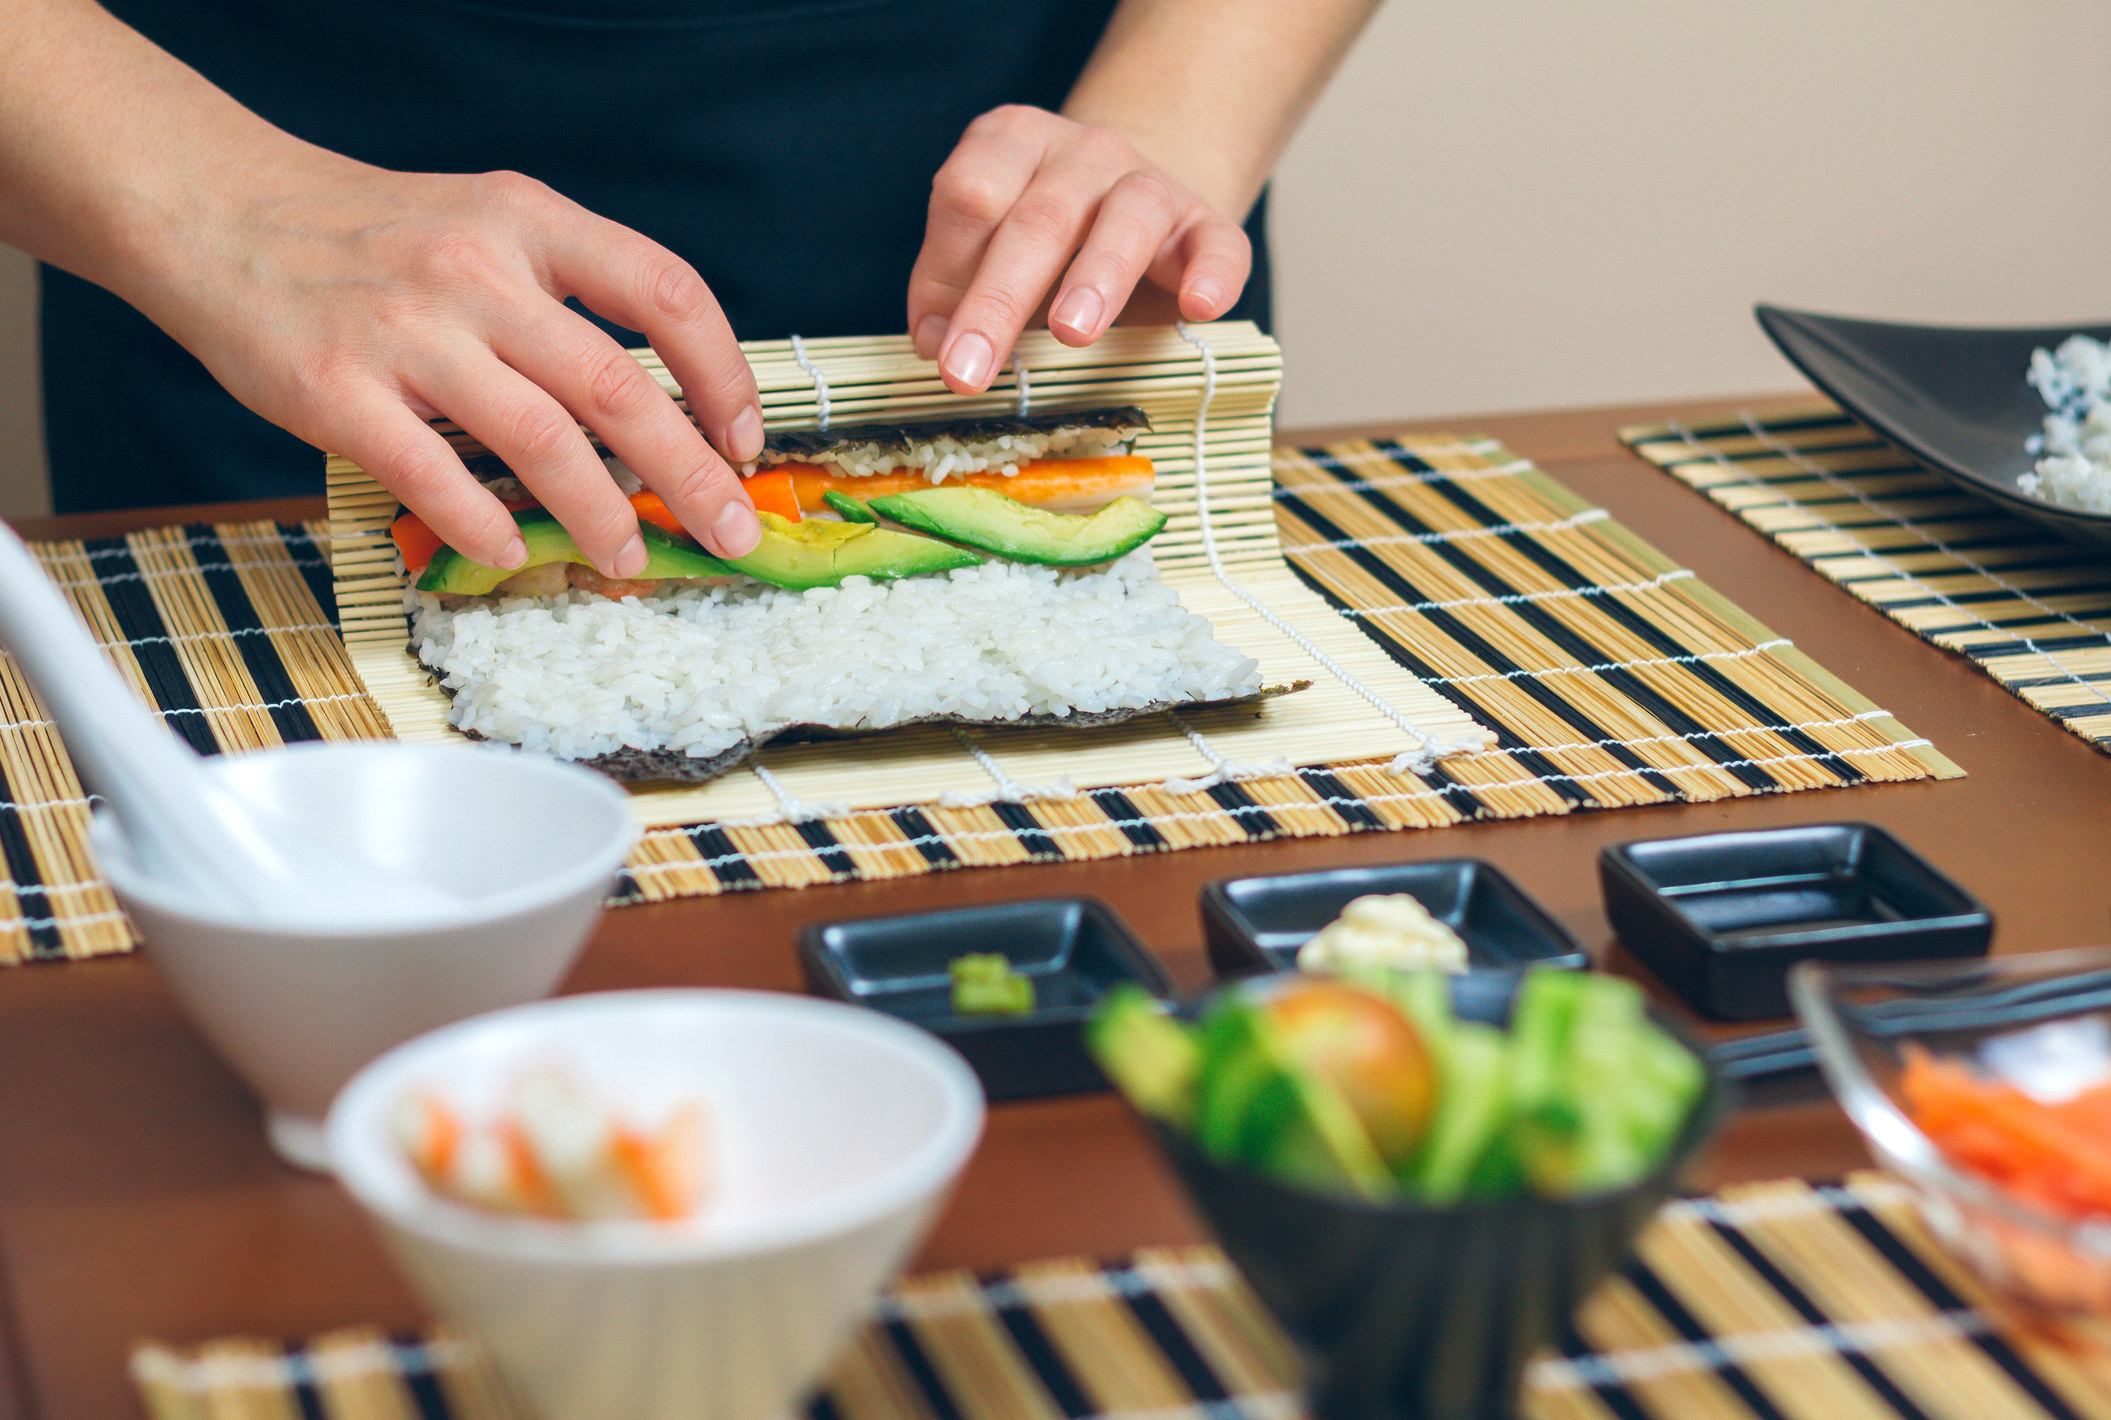 Detail of hands of person rolling up sushi.